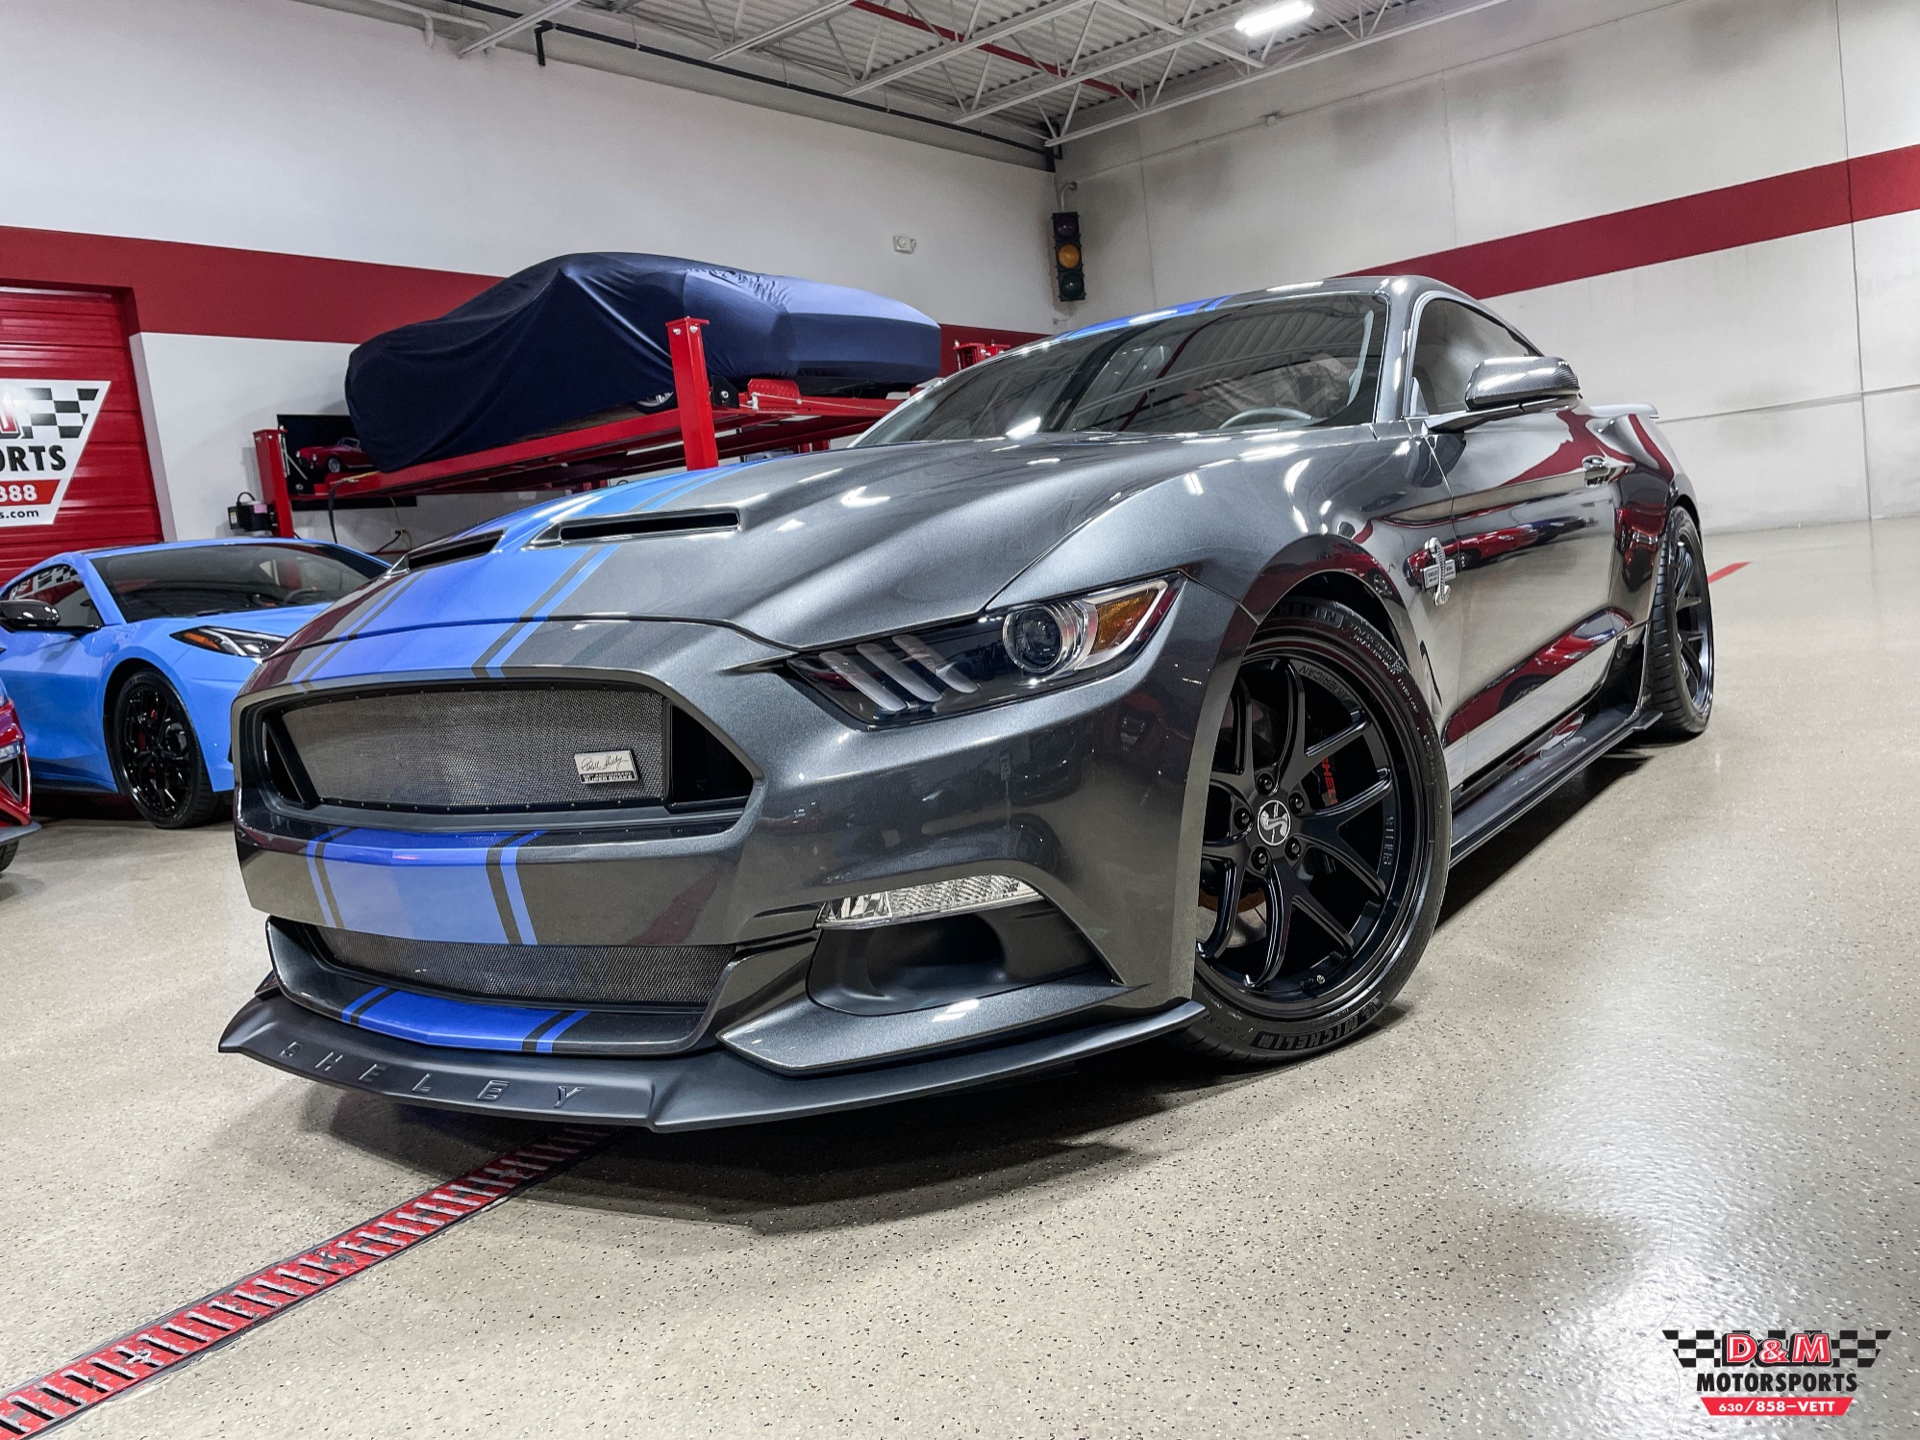 Used 2017 Ford Mustang Shelby Super Snake | Glen Ellyn, IL